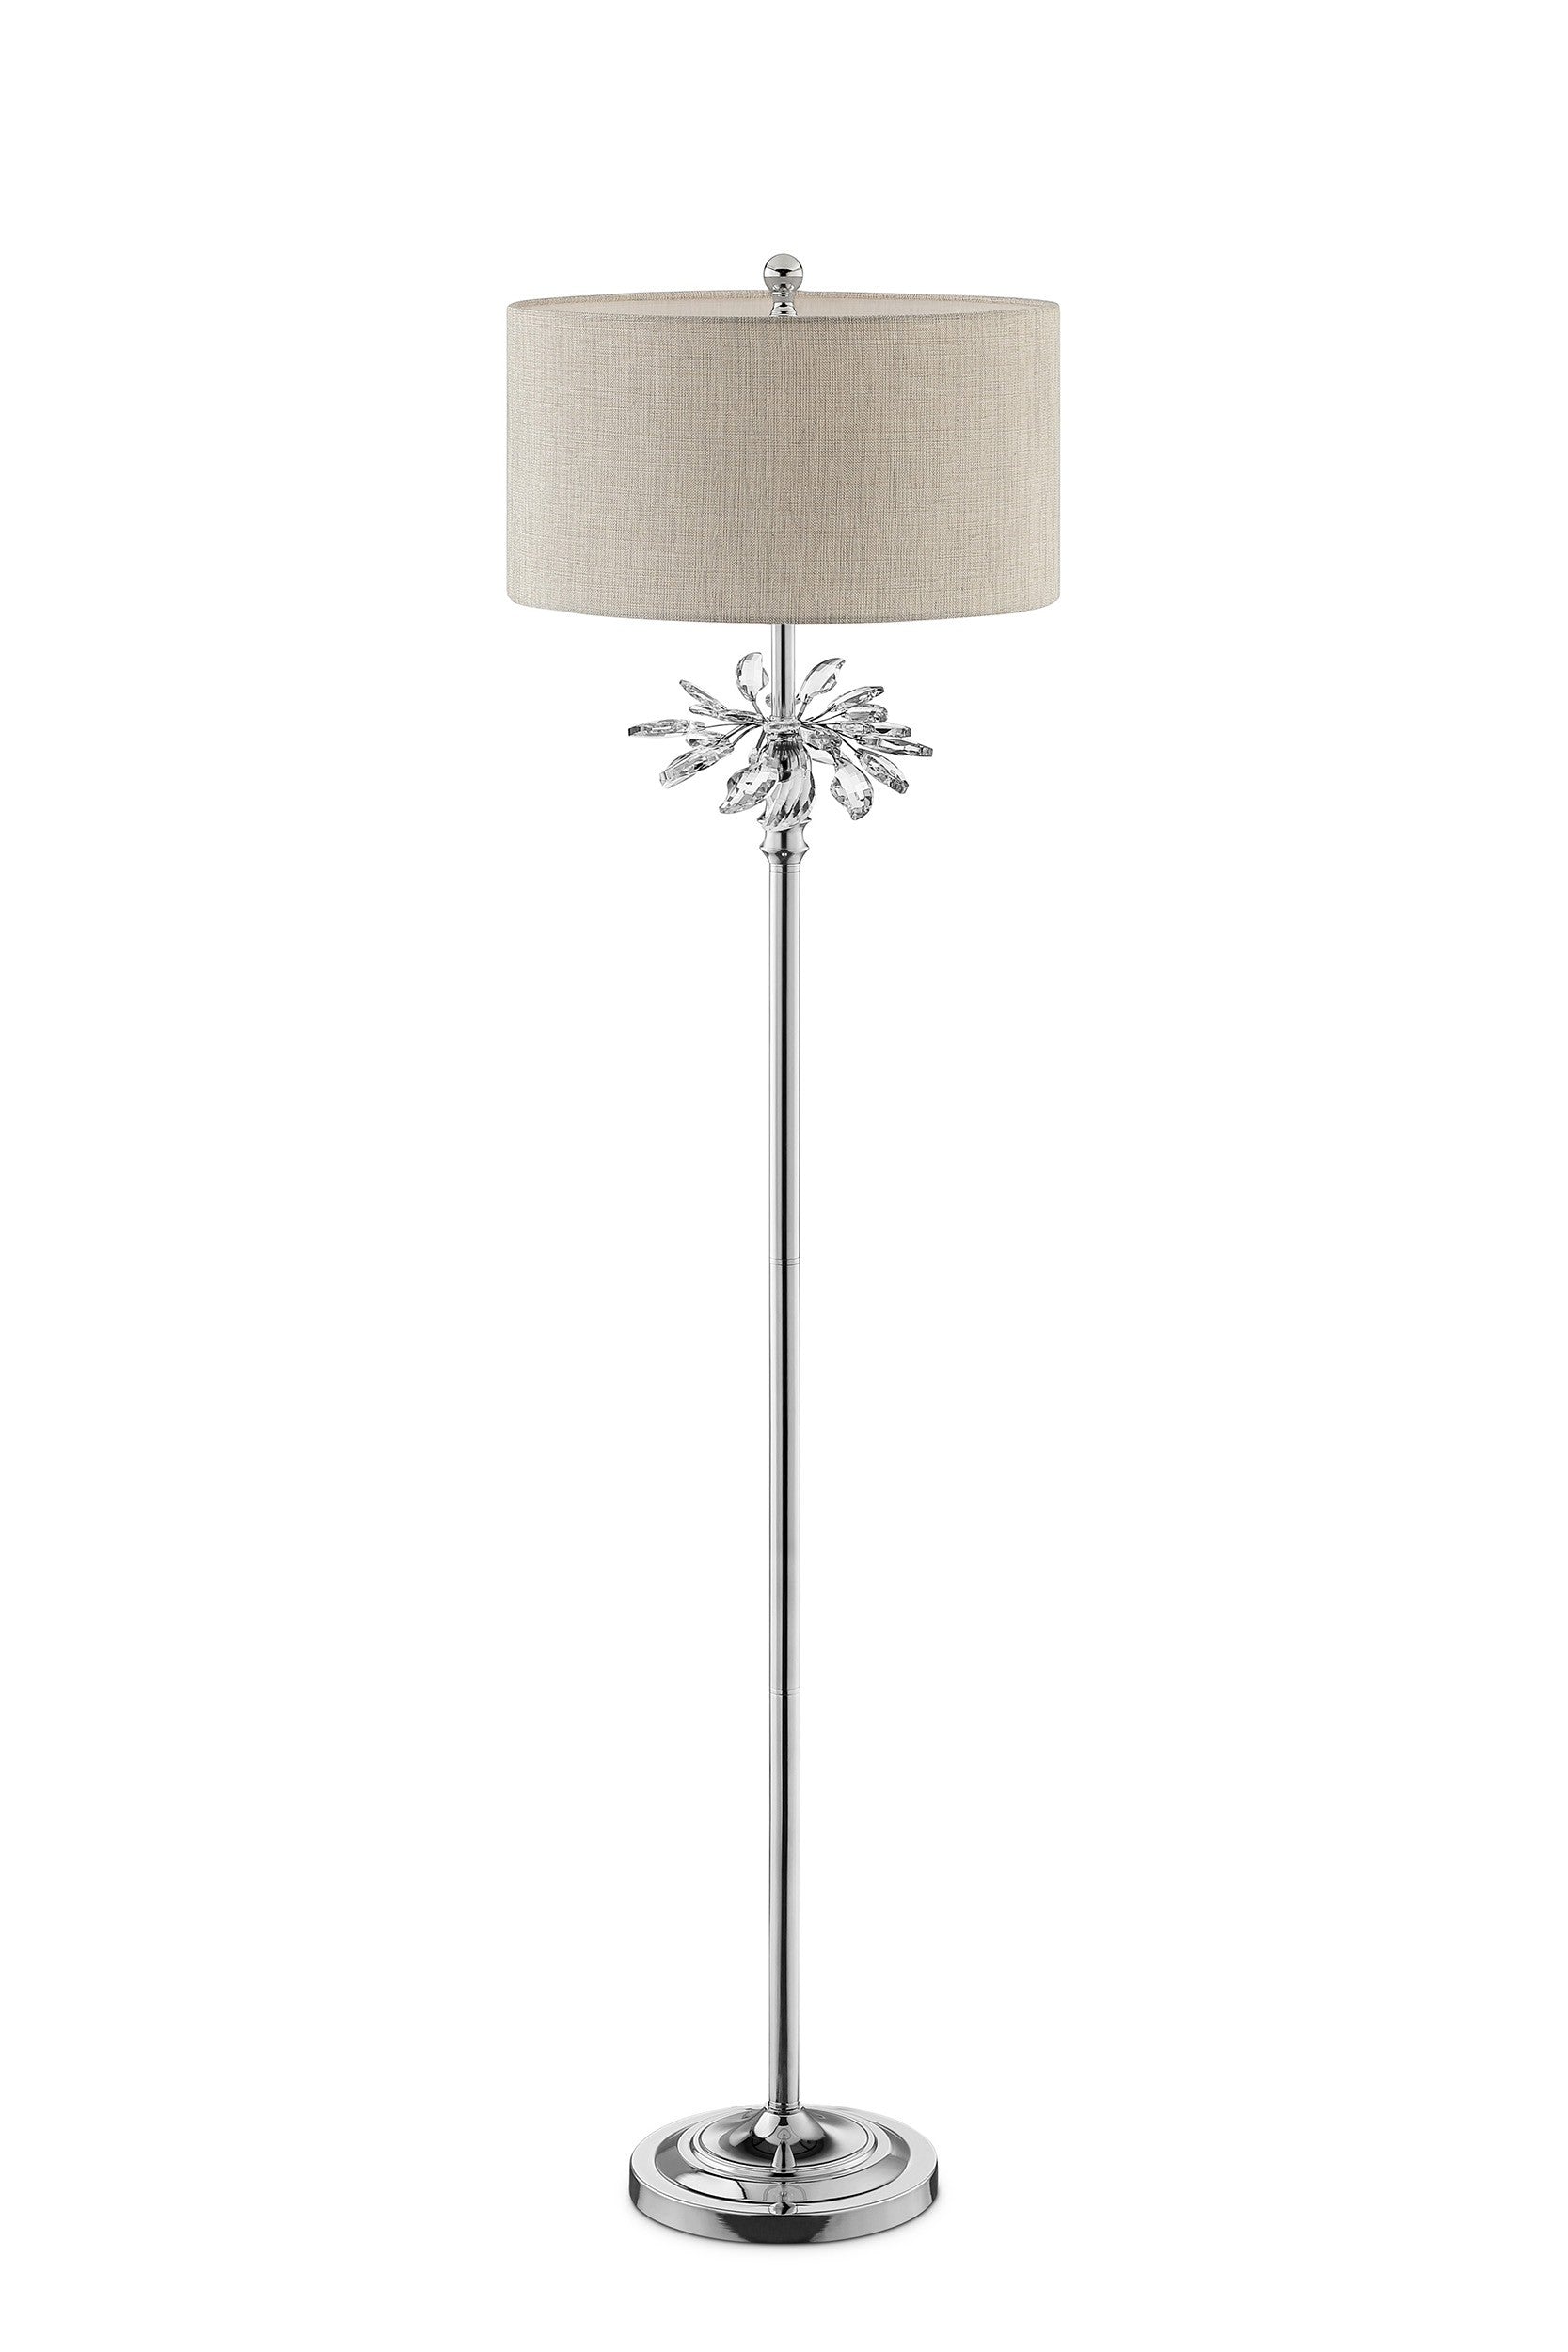 Silver Chrome Tall Floor Lamp with Starburst Crystals